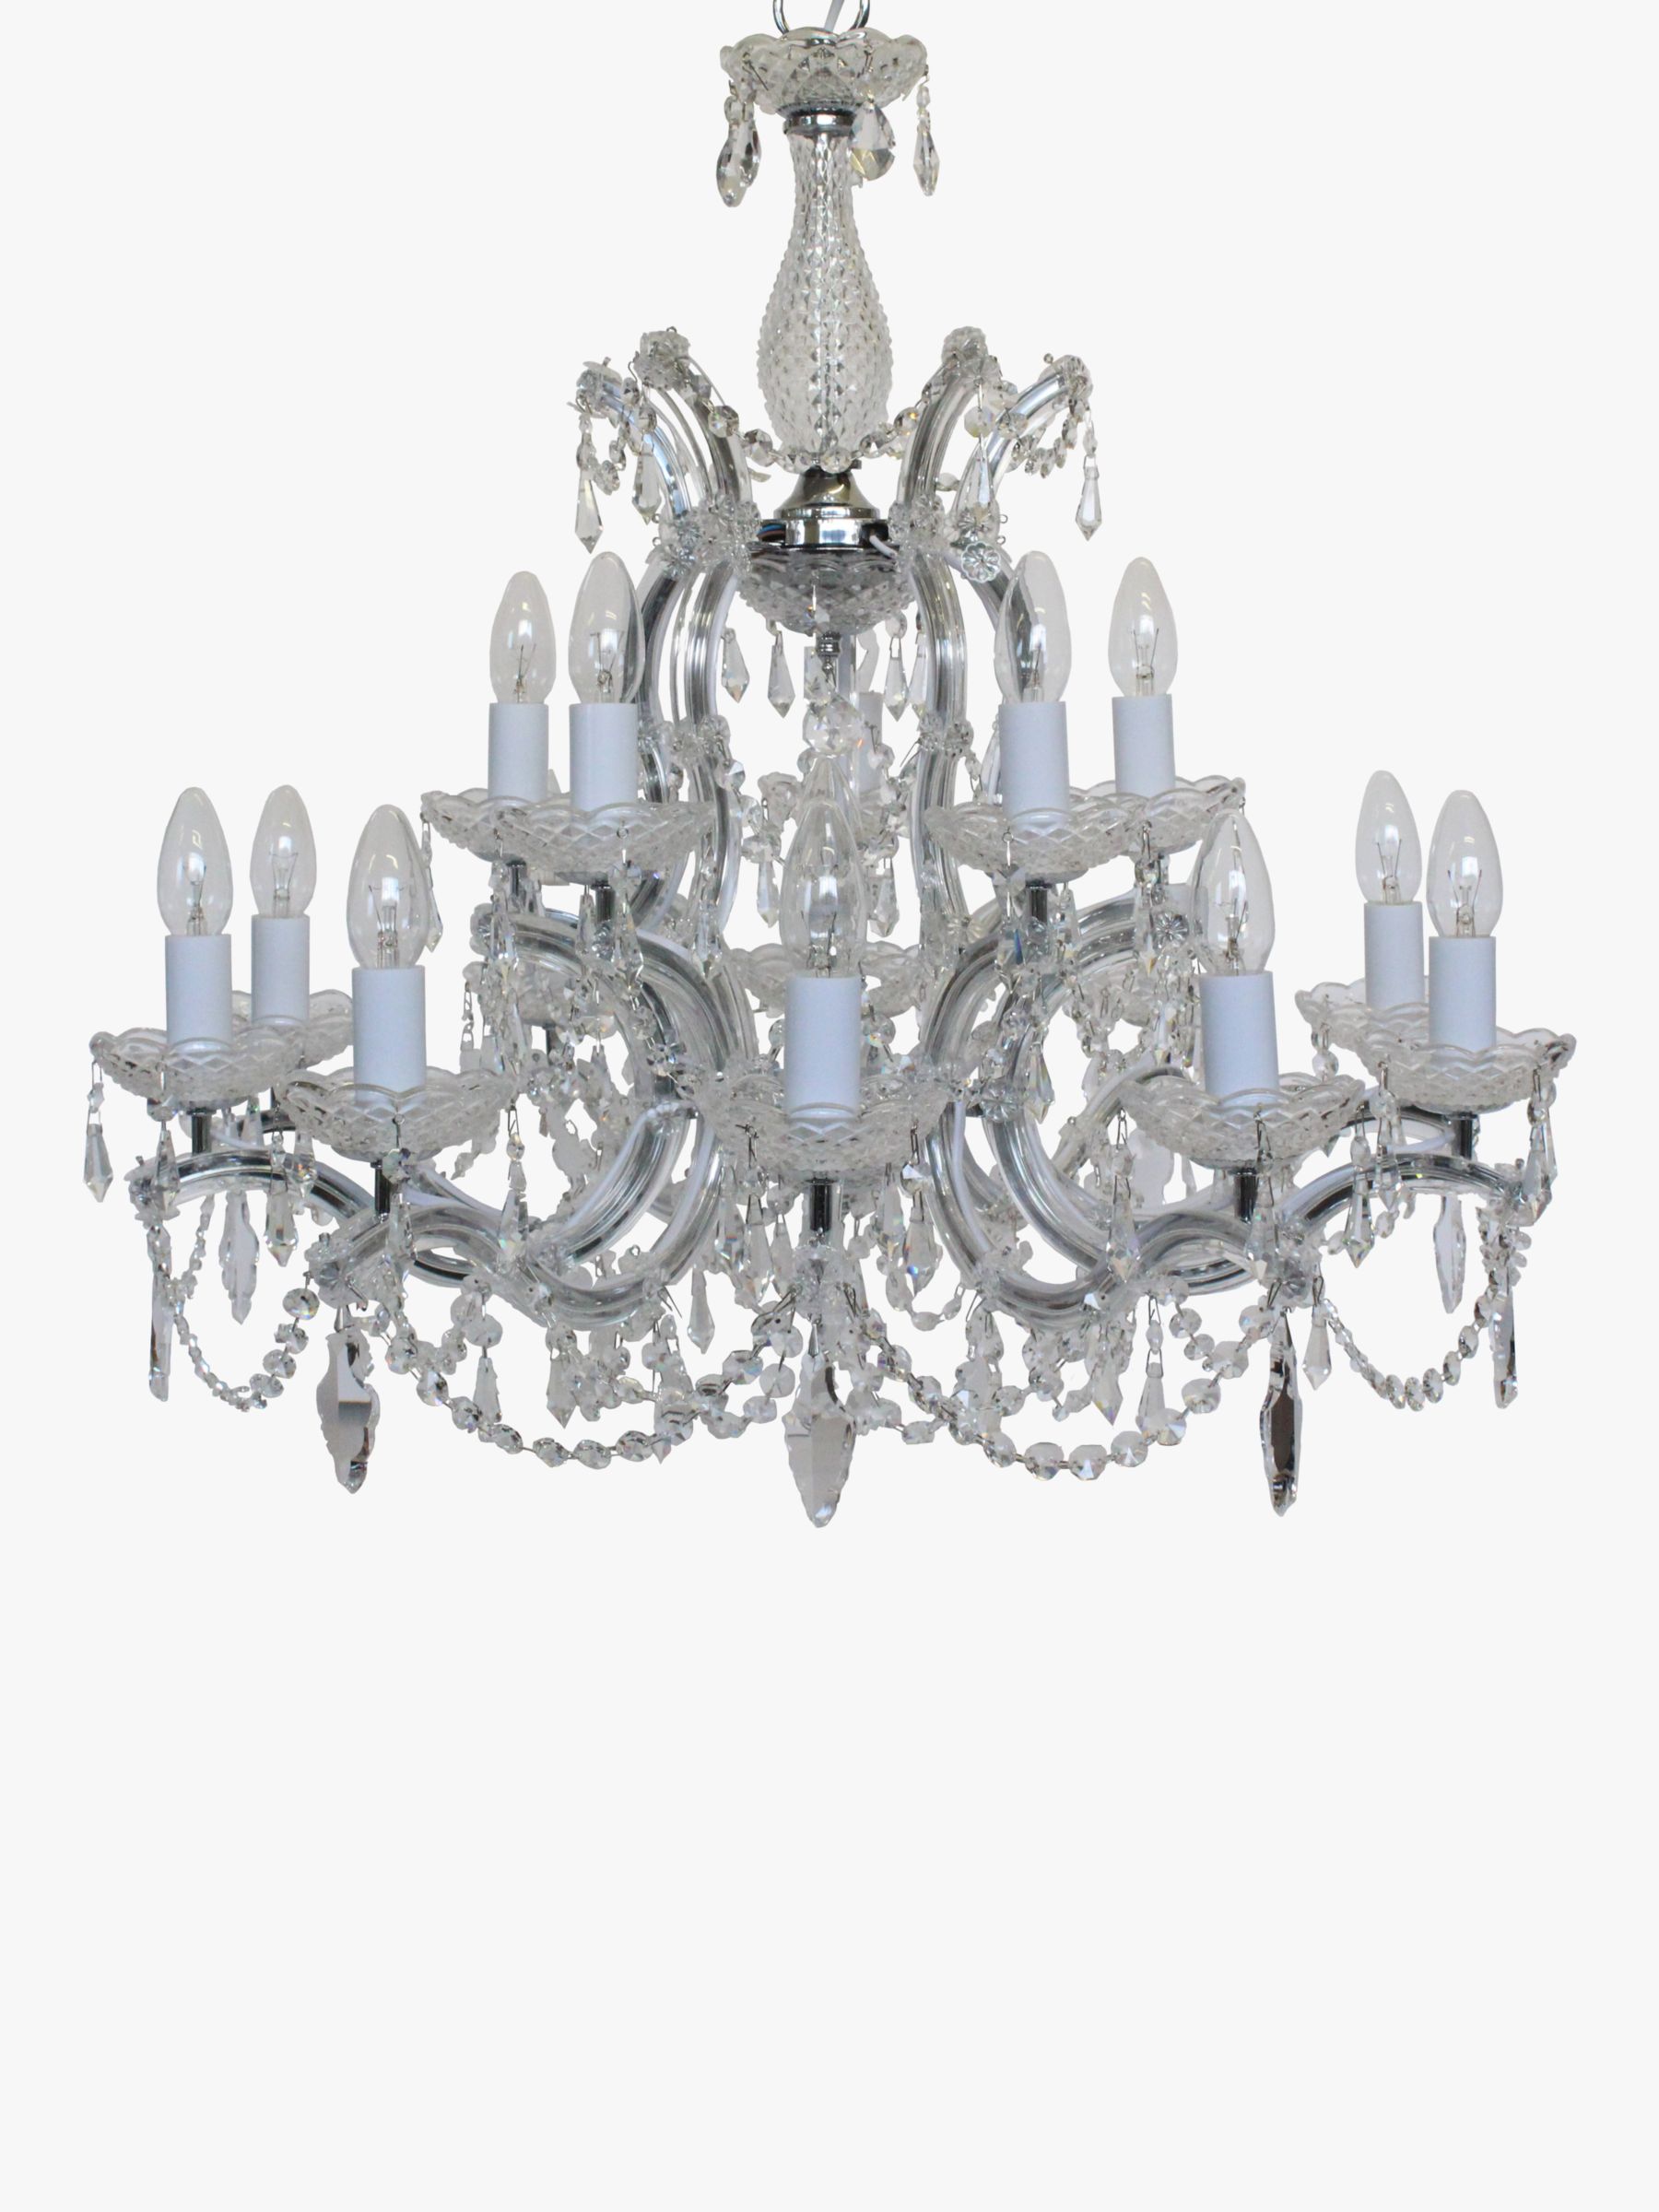 Photo of Impex marie theresa double tiered crystal chandelier ceiling light large